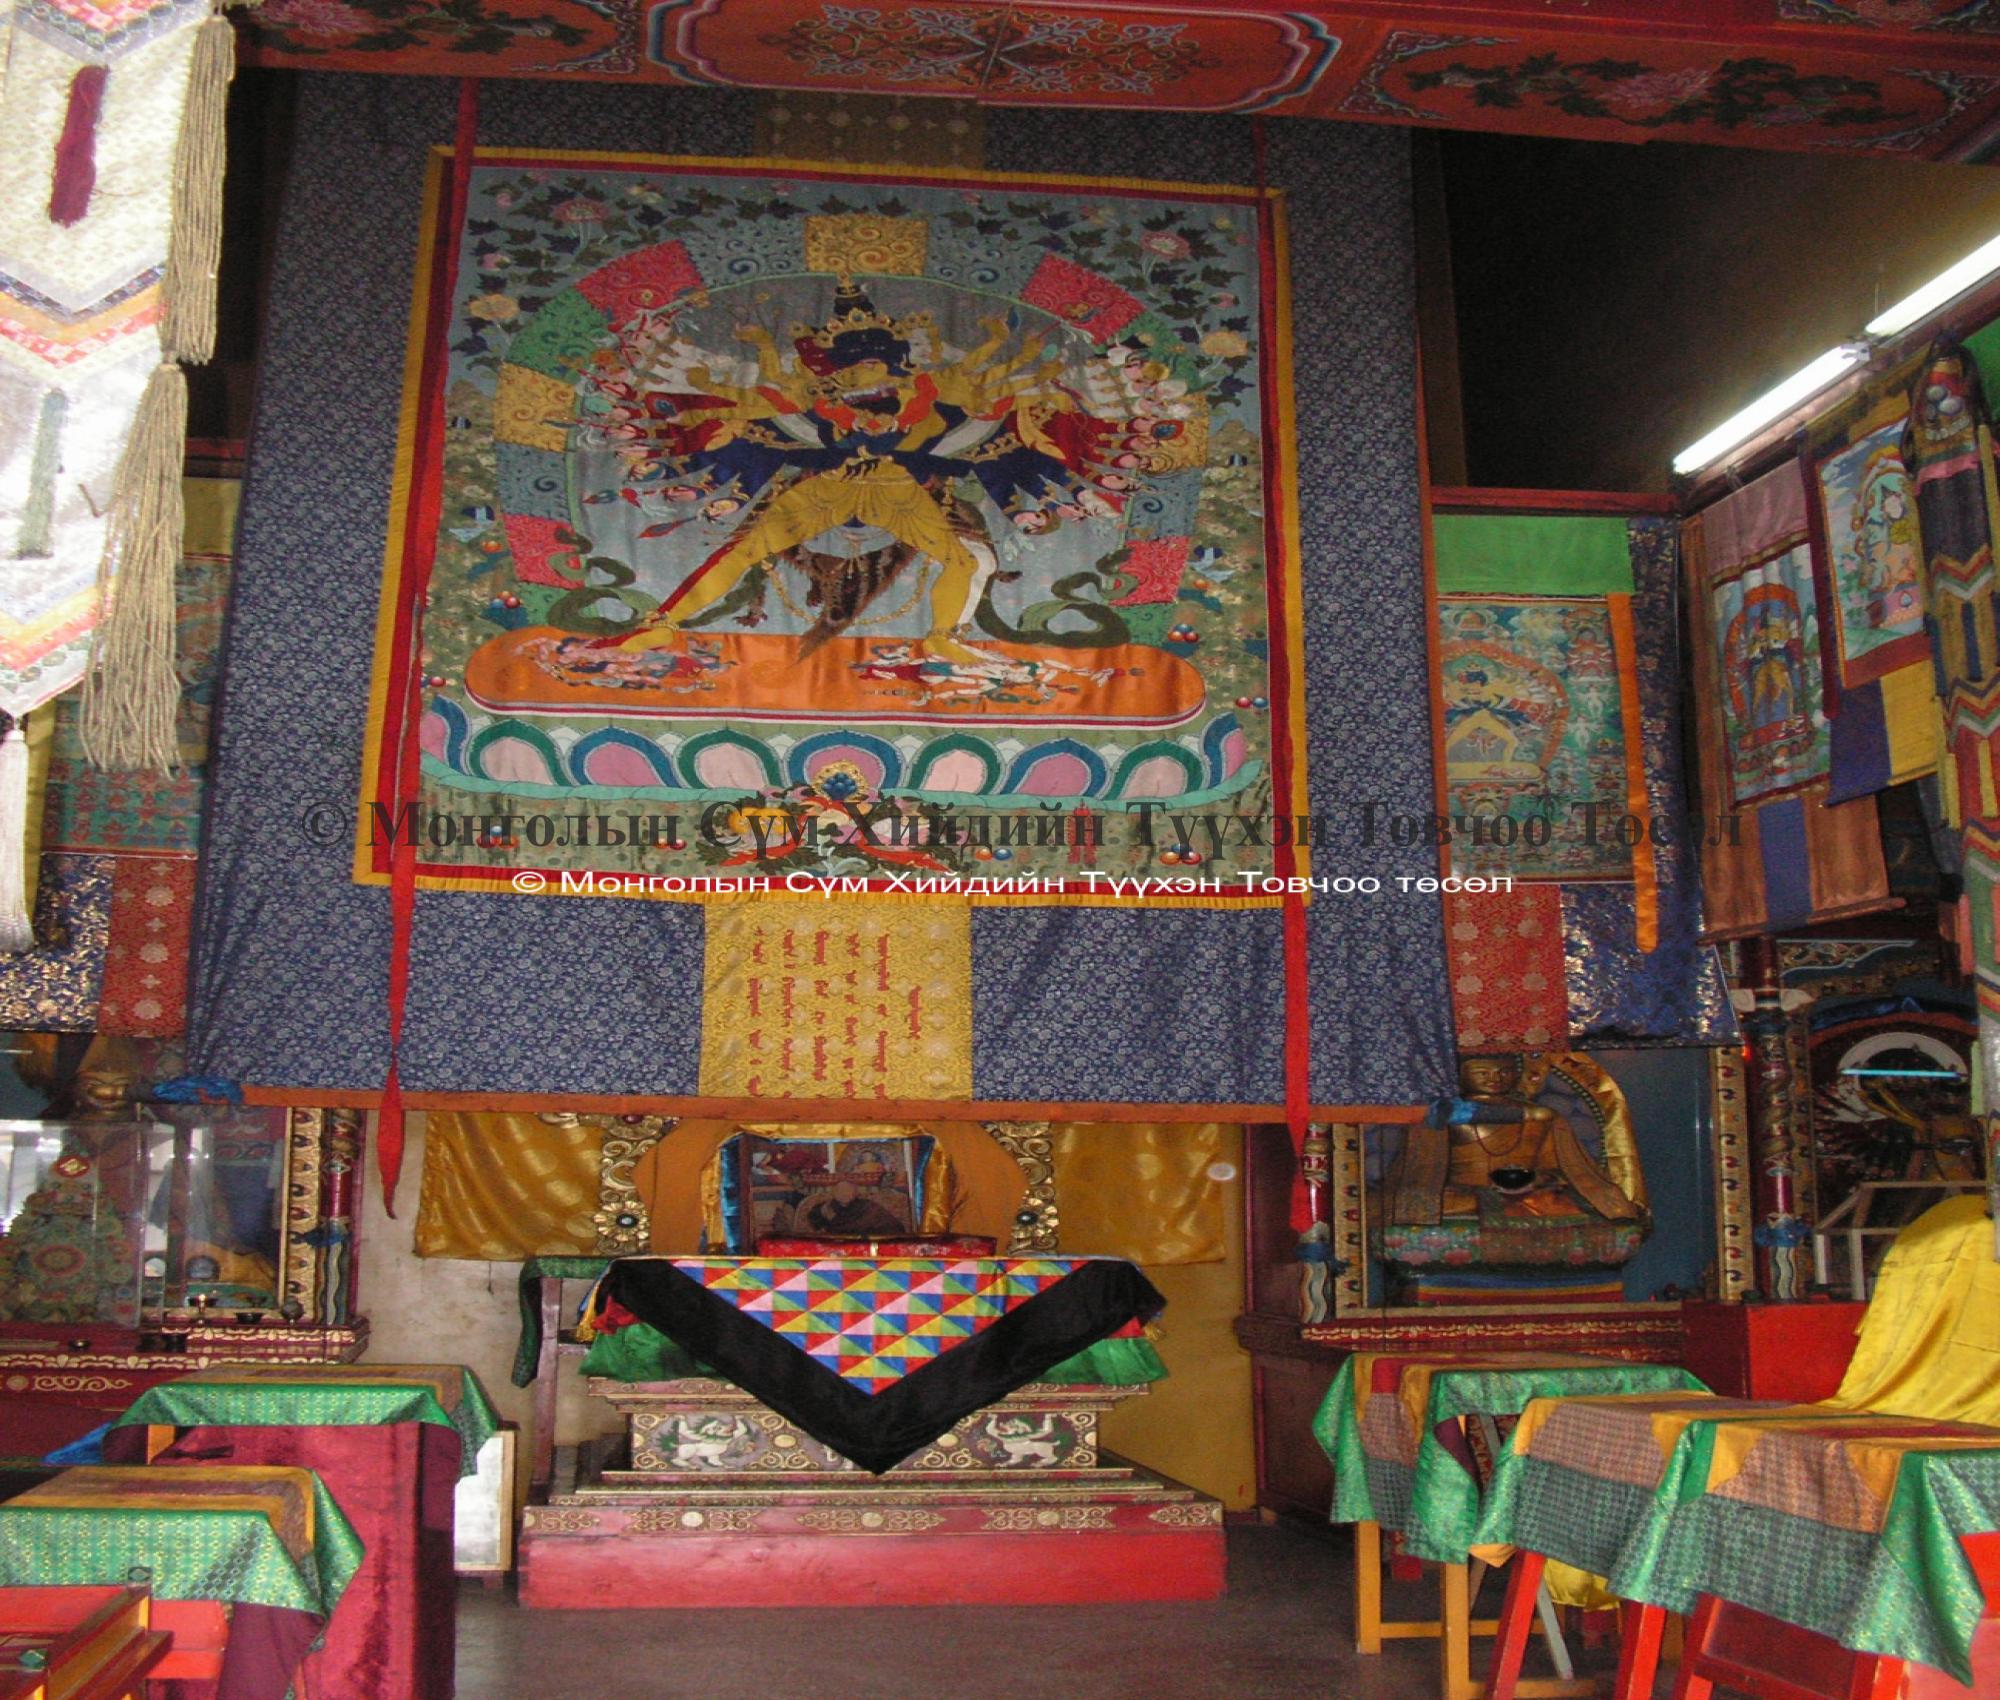 Interior of the temple